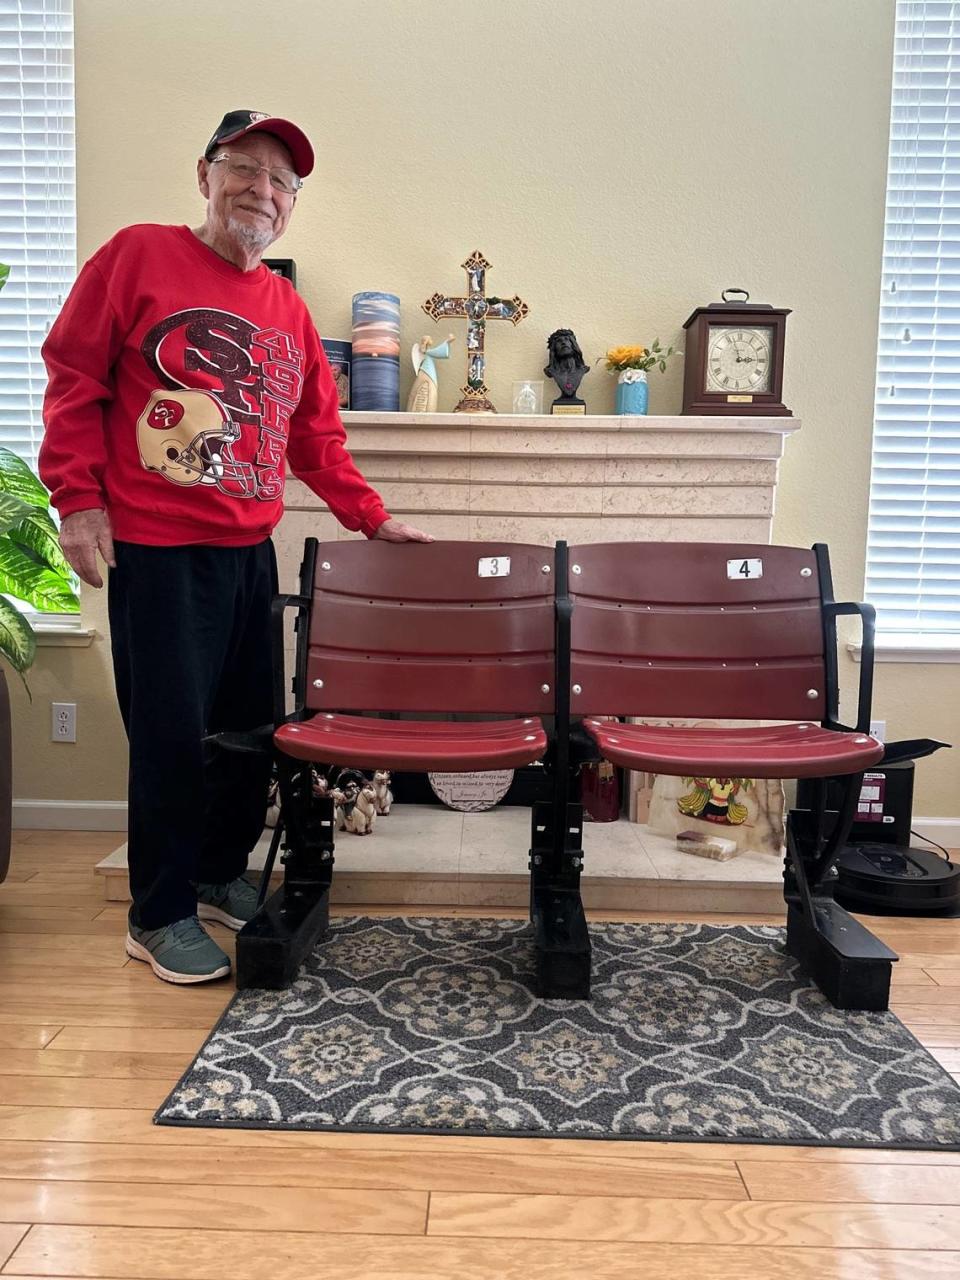 Nearly 90 Niners fan James Valdivia of Modesto stands by the two seats from Candlestick Park he got as souvenirs after the stadium was torn down. Photo courtesy of the Straubinger family